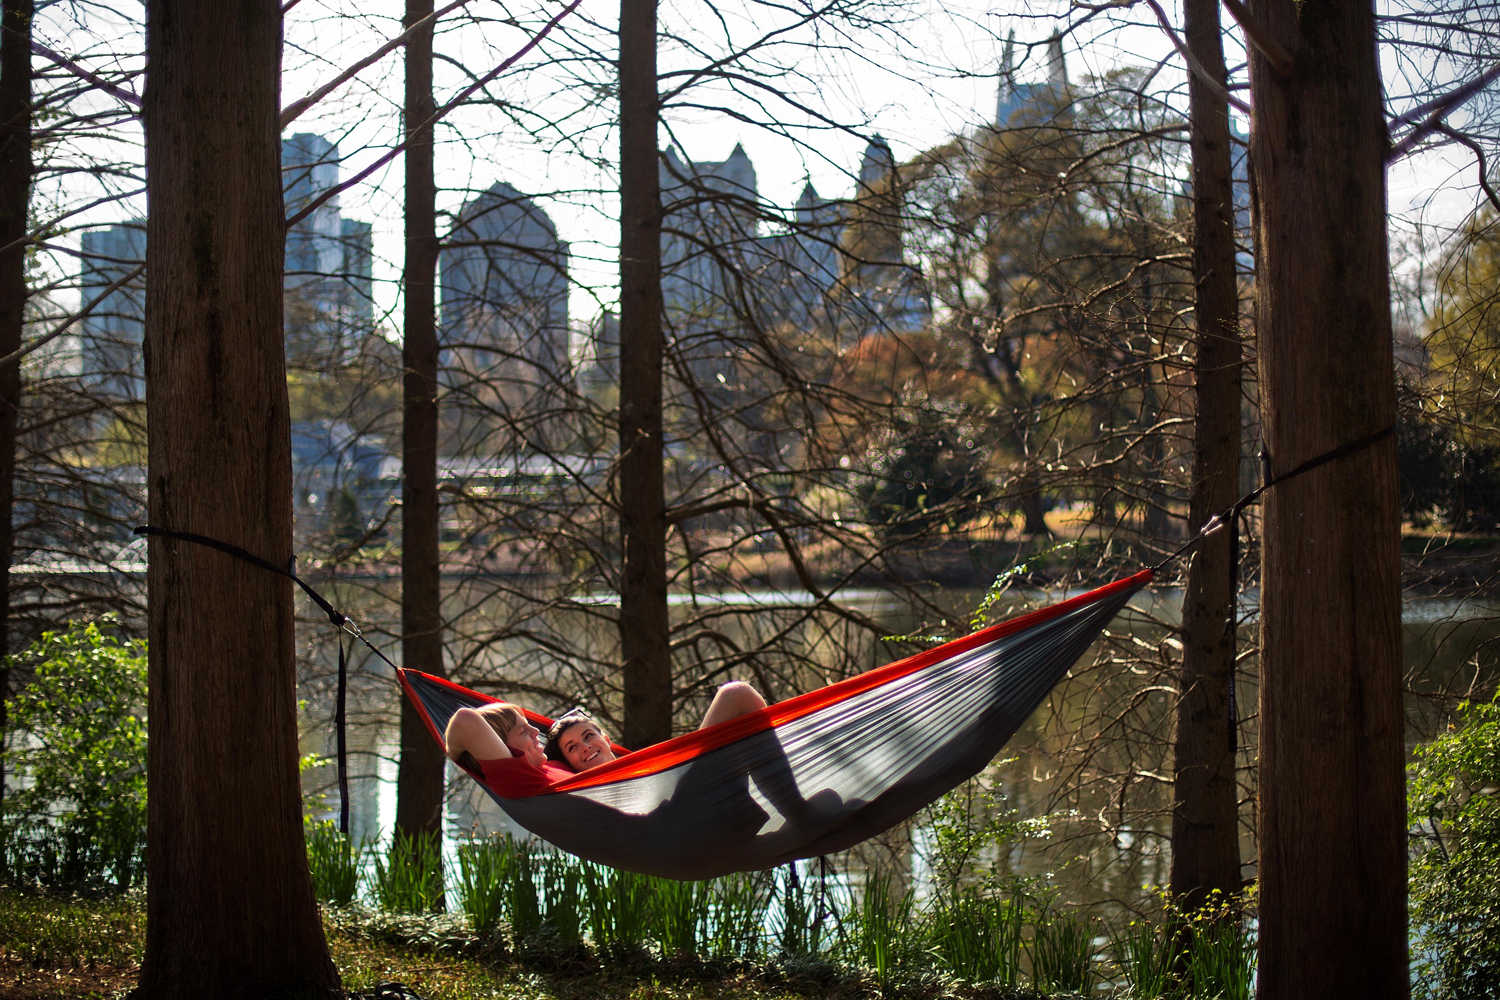 From left, Chris Hoag and Parrish Brown sit in a hammock they put up along the pond in Piedmont Park in Atlanta April 1, 2014.